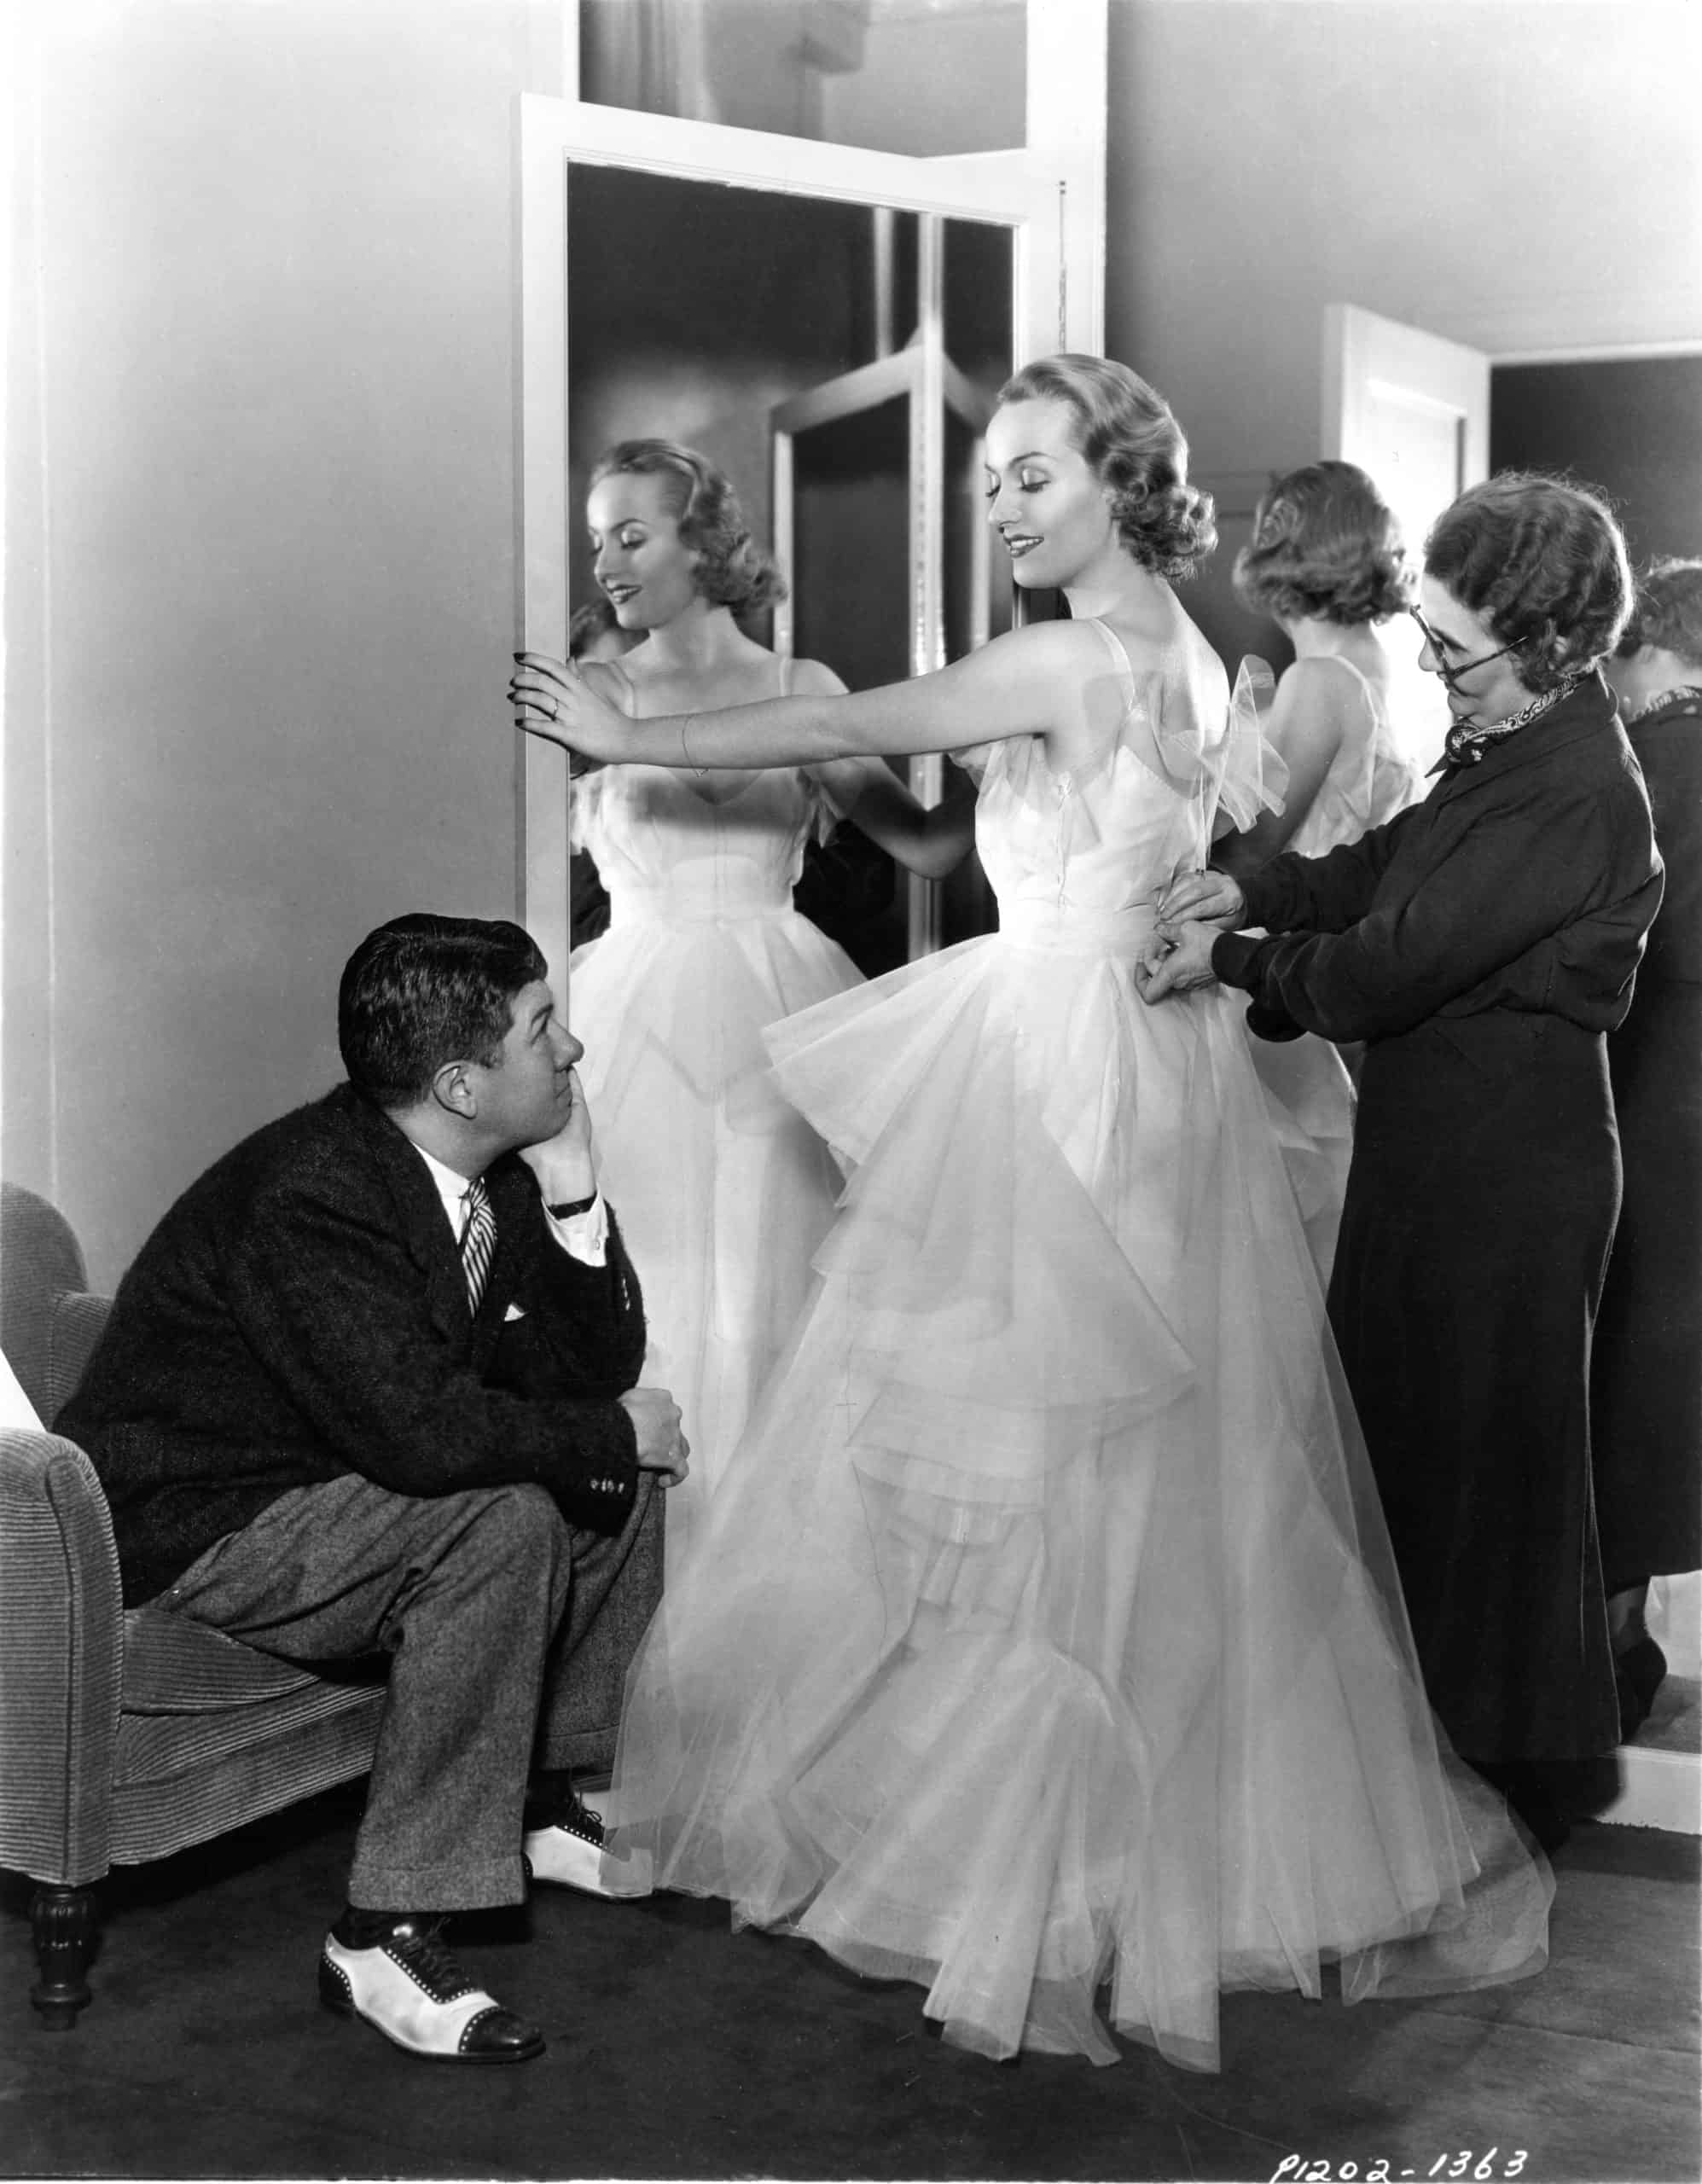 Costume Designer TRAVIS BANTON CAROLE LOMBARD and Assistant MARY O'BRIEN candid fitting dress for THE PRINCESS COMES ACROSS 1936 director WILLIAM K. HOWARD Paramount Pictures. Image shot 1936. Exact date unknown.